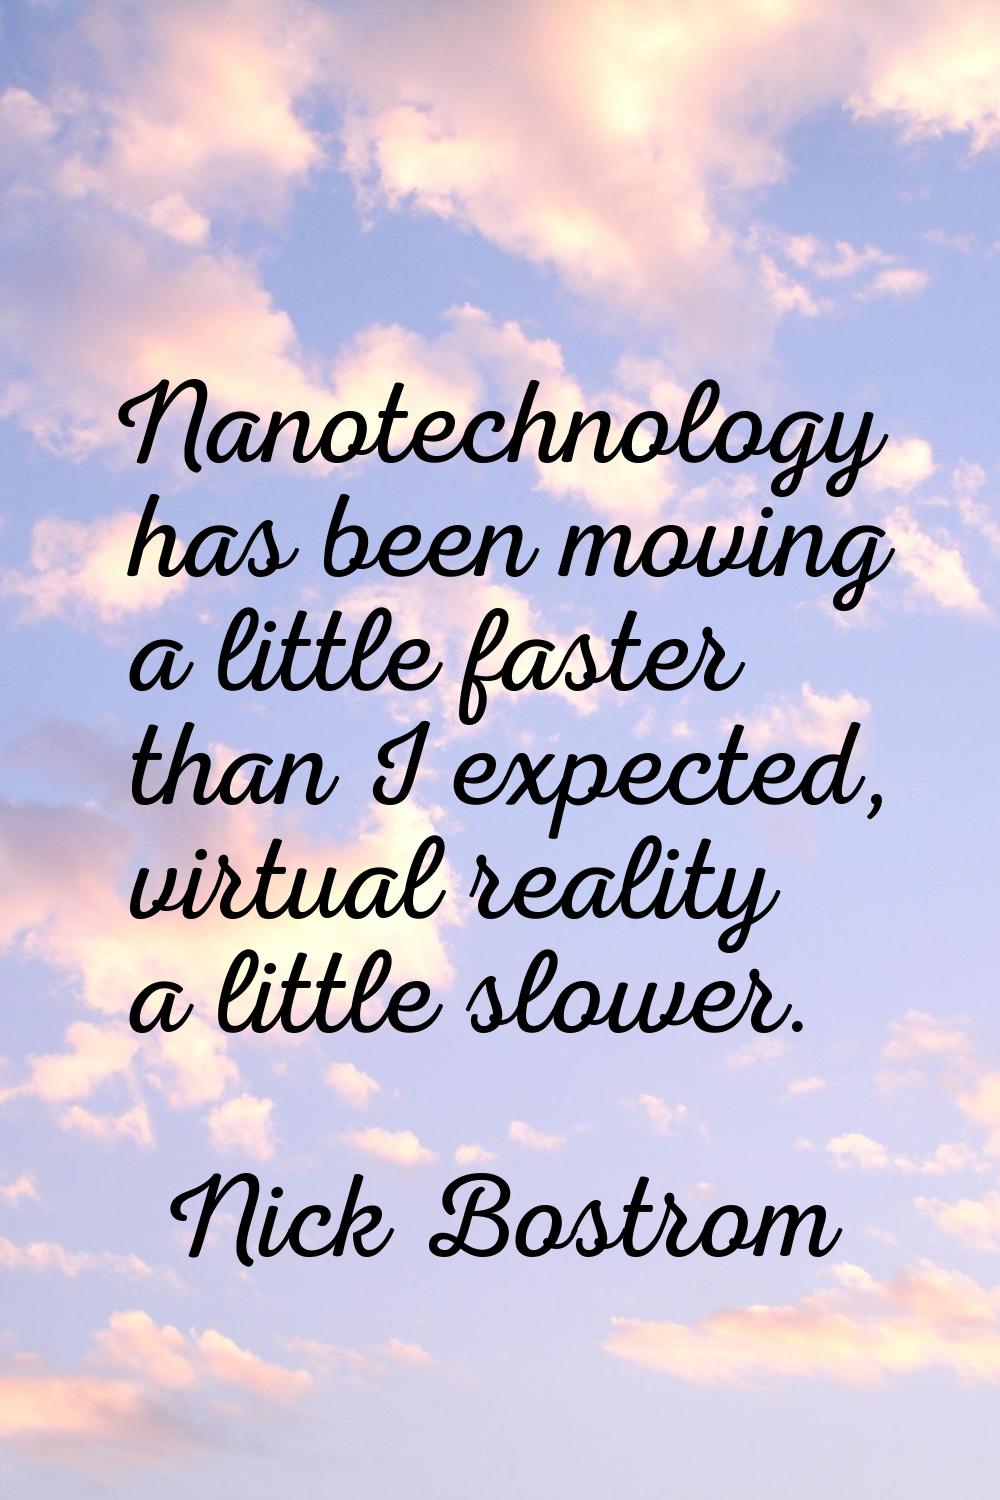 Nanotechnology has been moving a little faster than I expected, virtual reality a little slower.